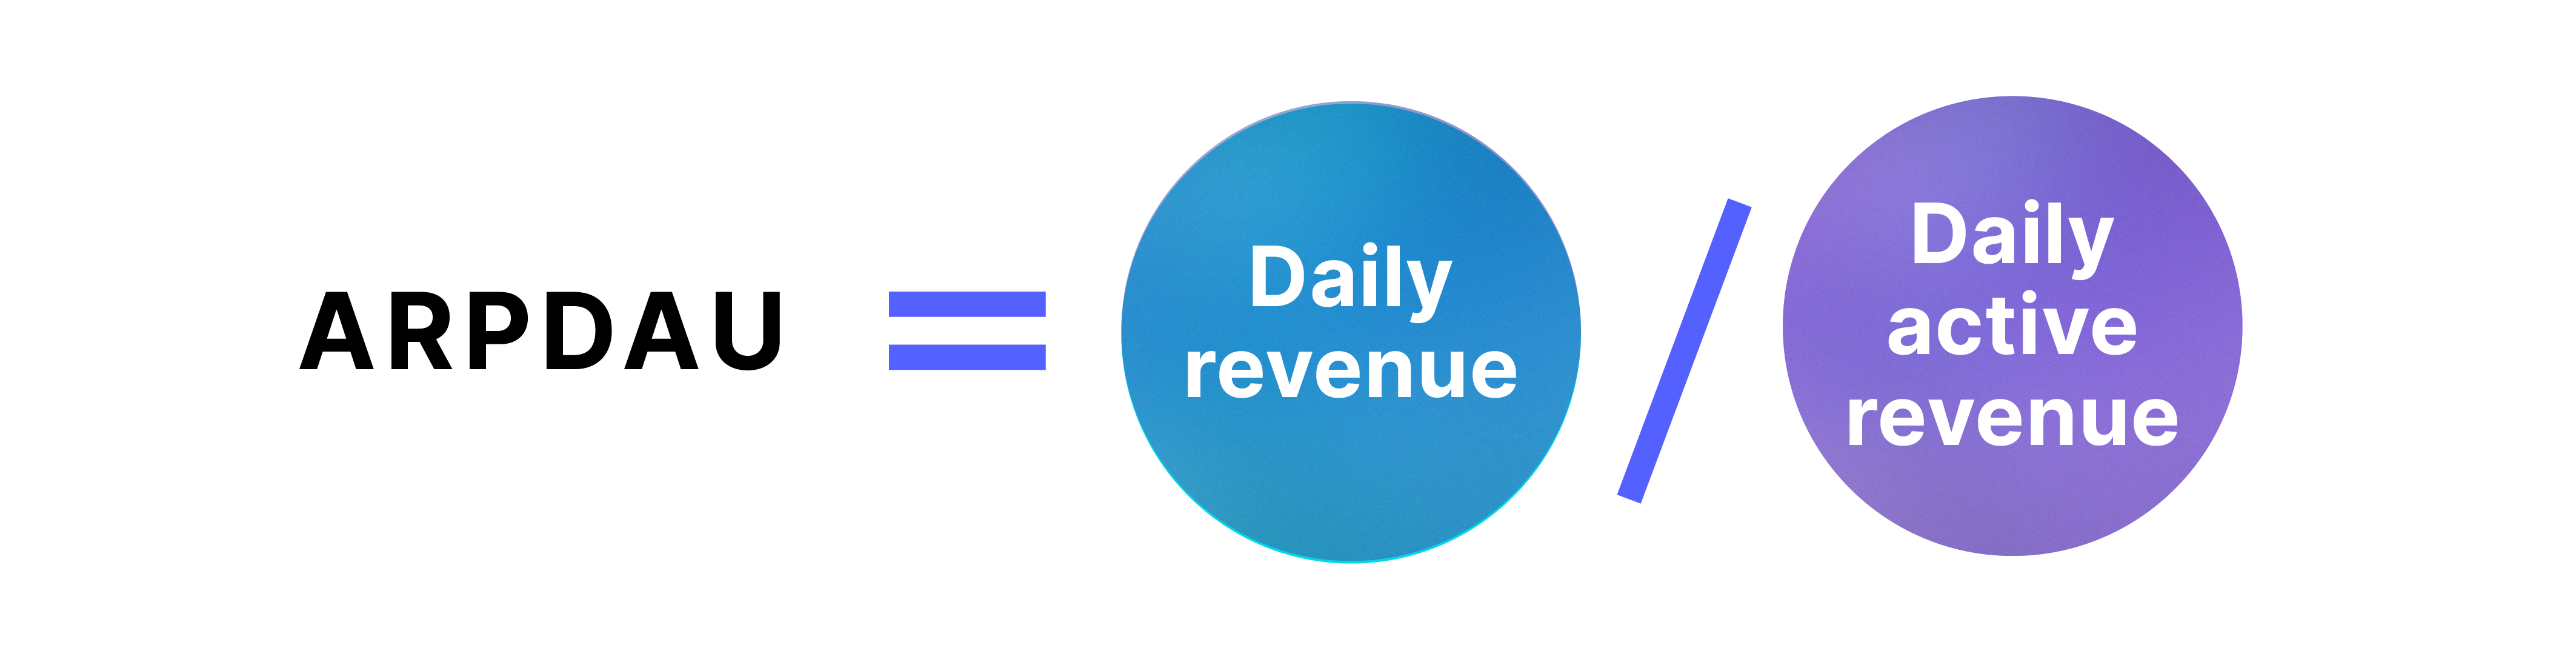 ARPDAU = Daily revenue / Daily active users